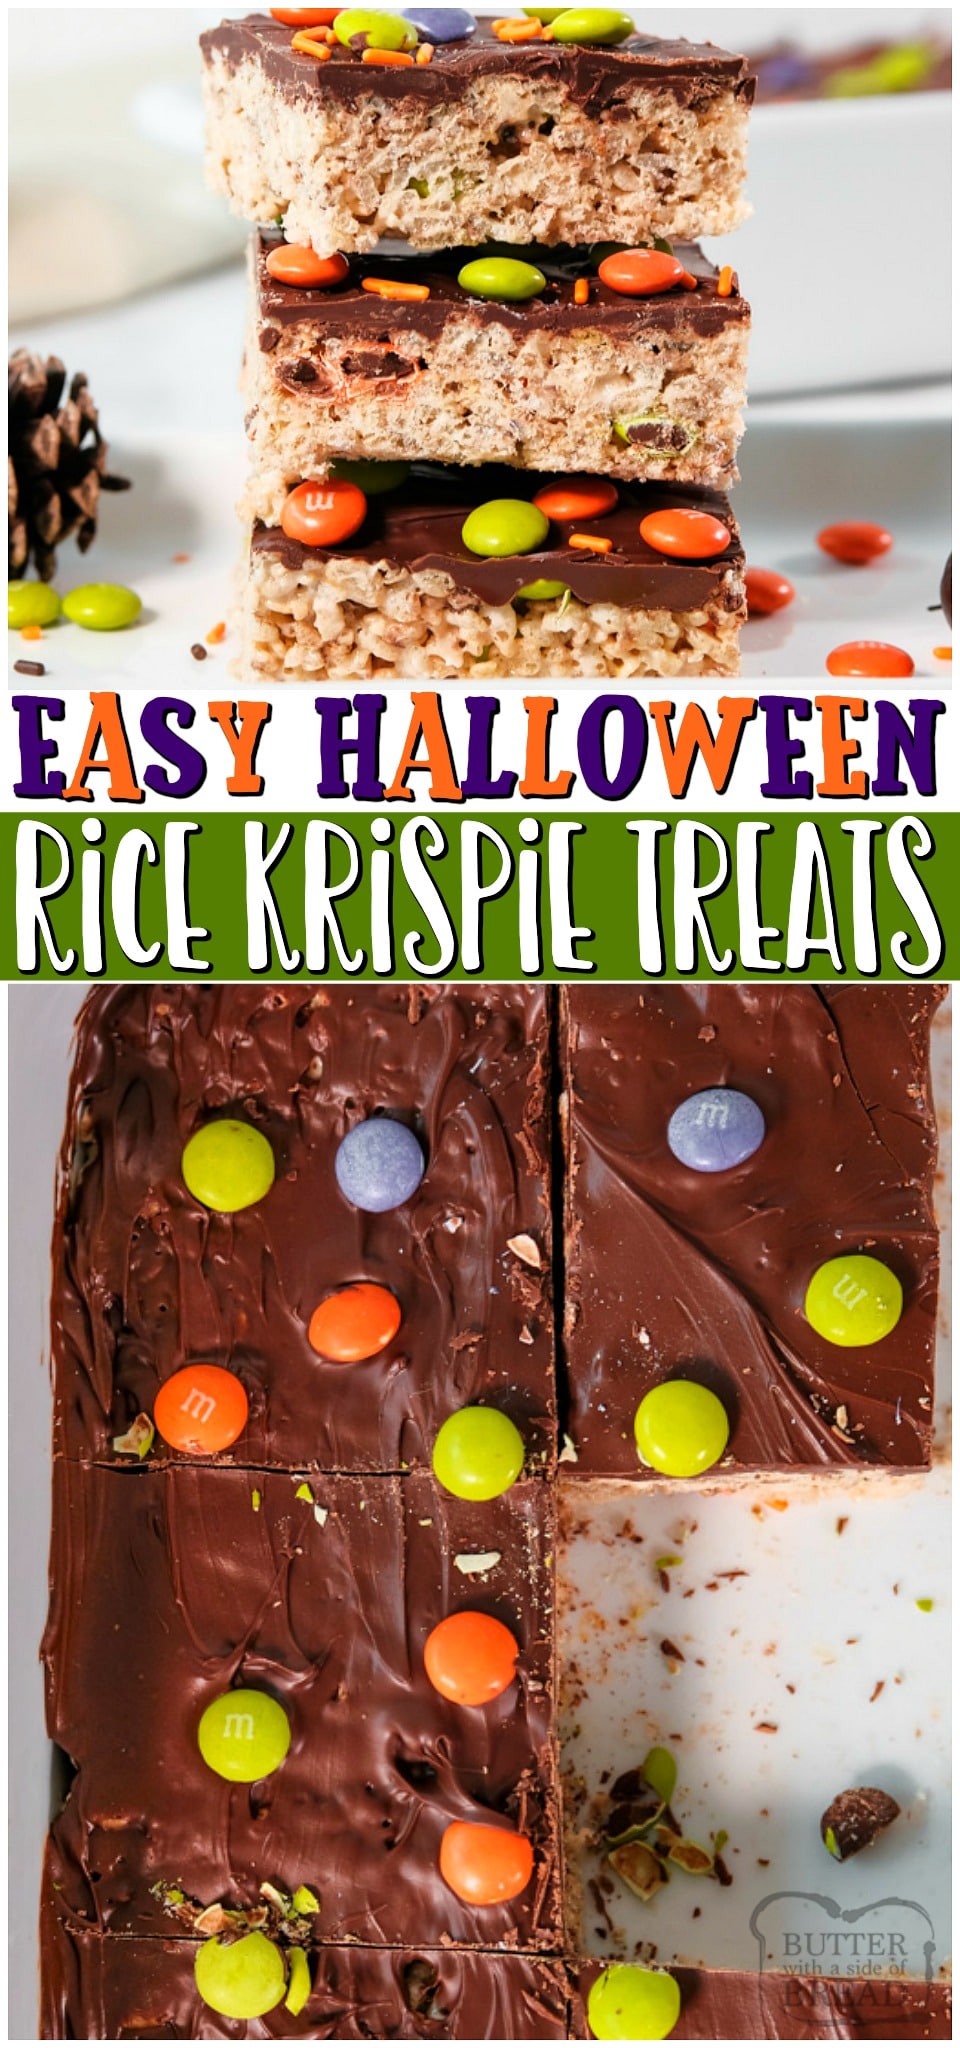 Halloween Rice Krispie Treats are the perfect Halloween dessert this fall! With sprinkles, chocolate, and marshmallow packed cereal bars in every bite, it’s sure to be a spooky delight. #Halloween #KrispieTreats #Marshmallows #Dessert #EasyRecipe from BUTTER WITH A SIDE OF BREAD